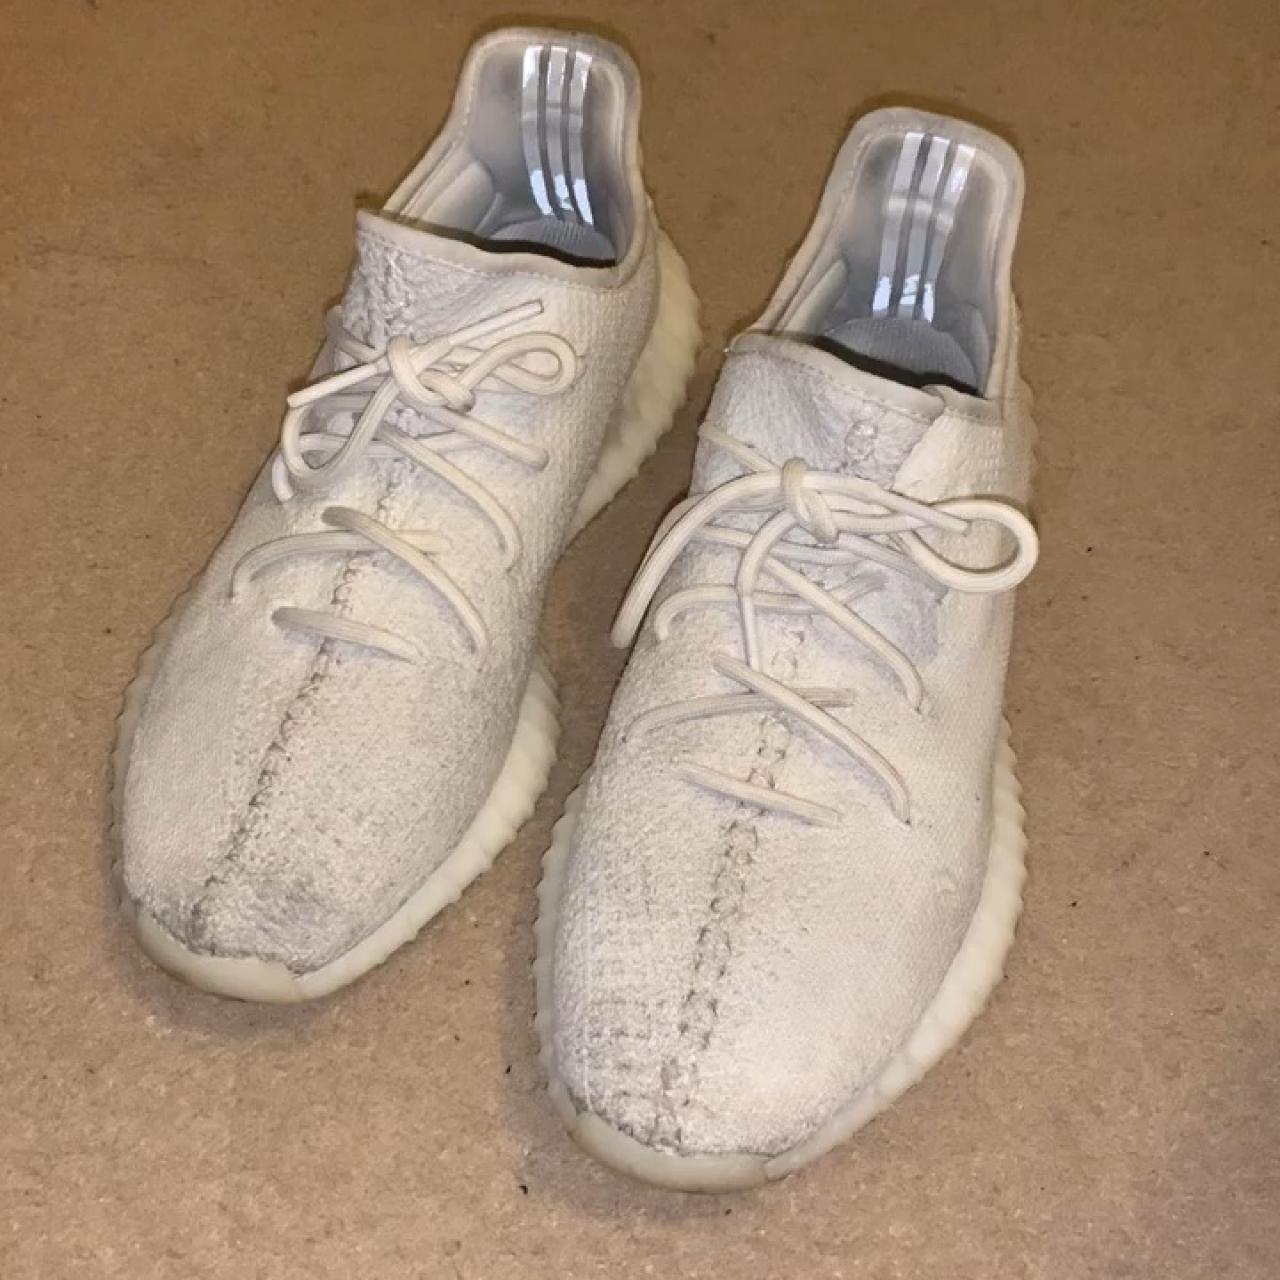 do white yeezy get dirty, OFF 76%,Free 